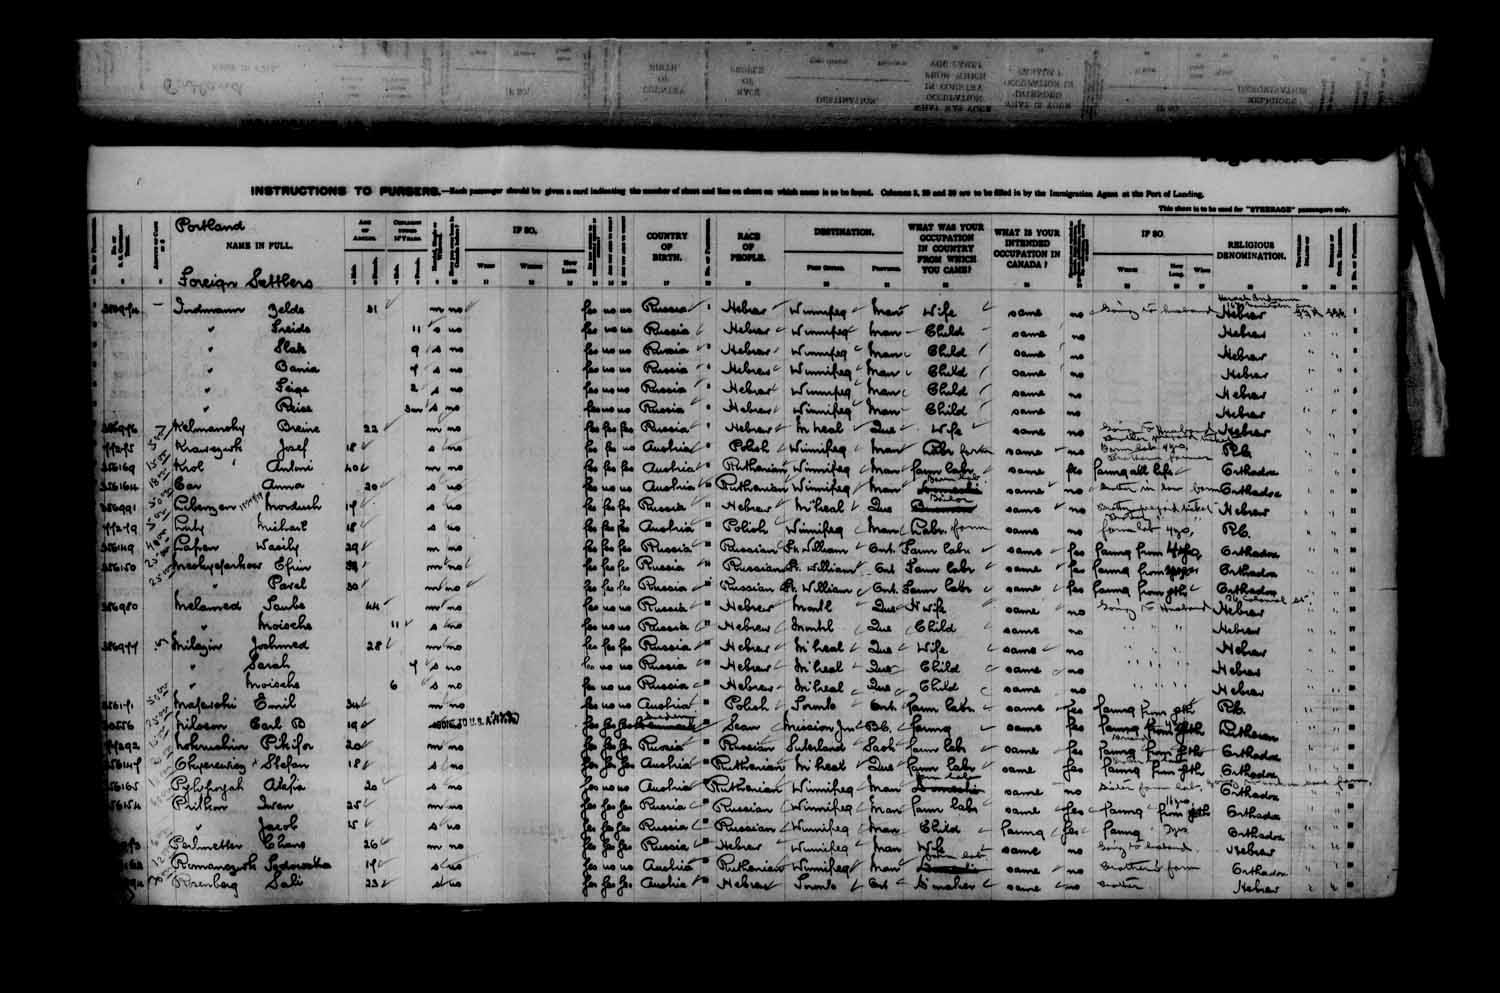 Digitized page of Passenger Lists for Image No.: e003622994